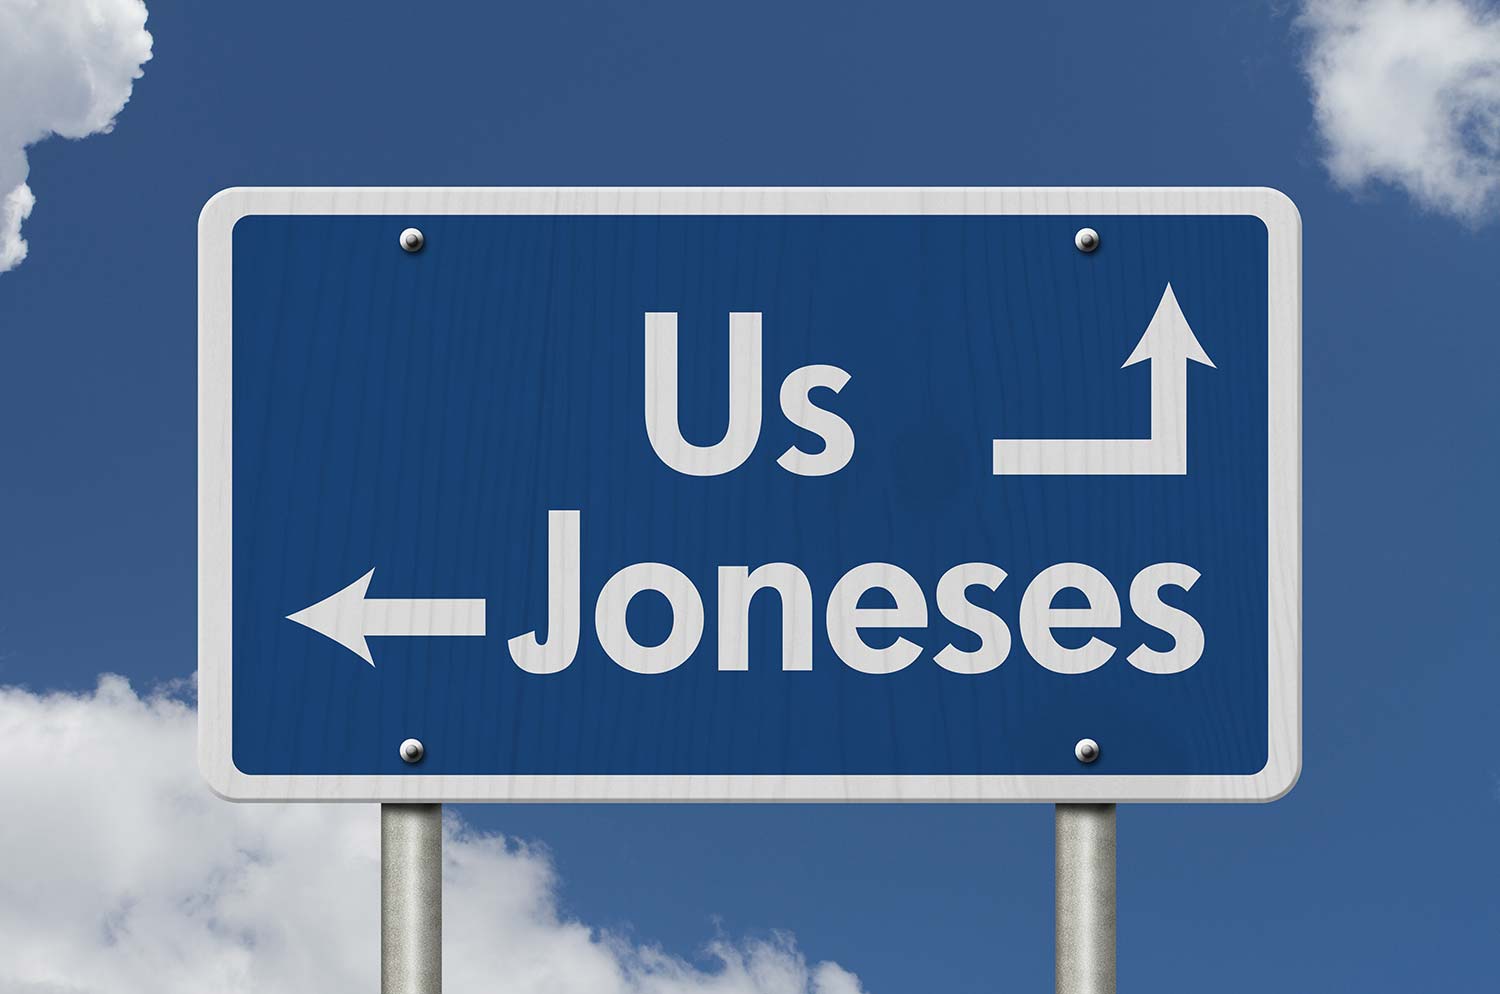 A road sign with arrows pointing to us and to the joneses